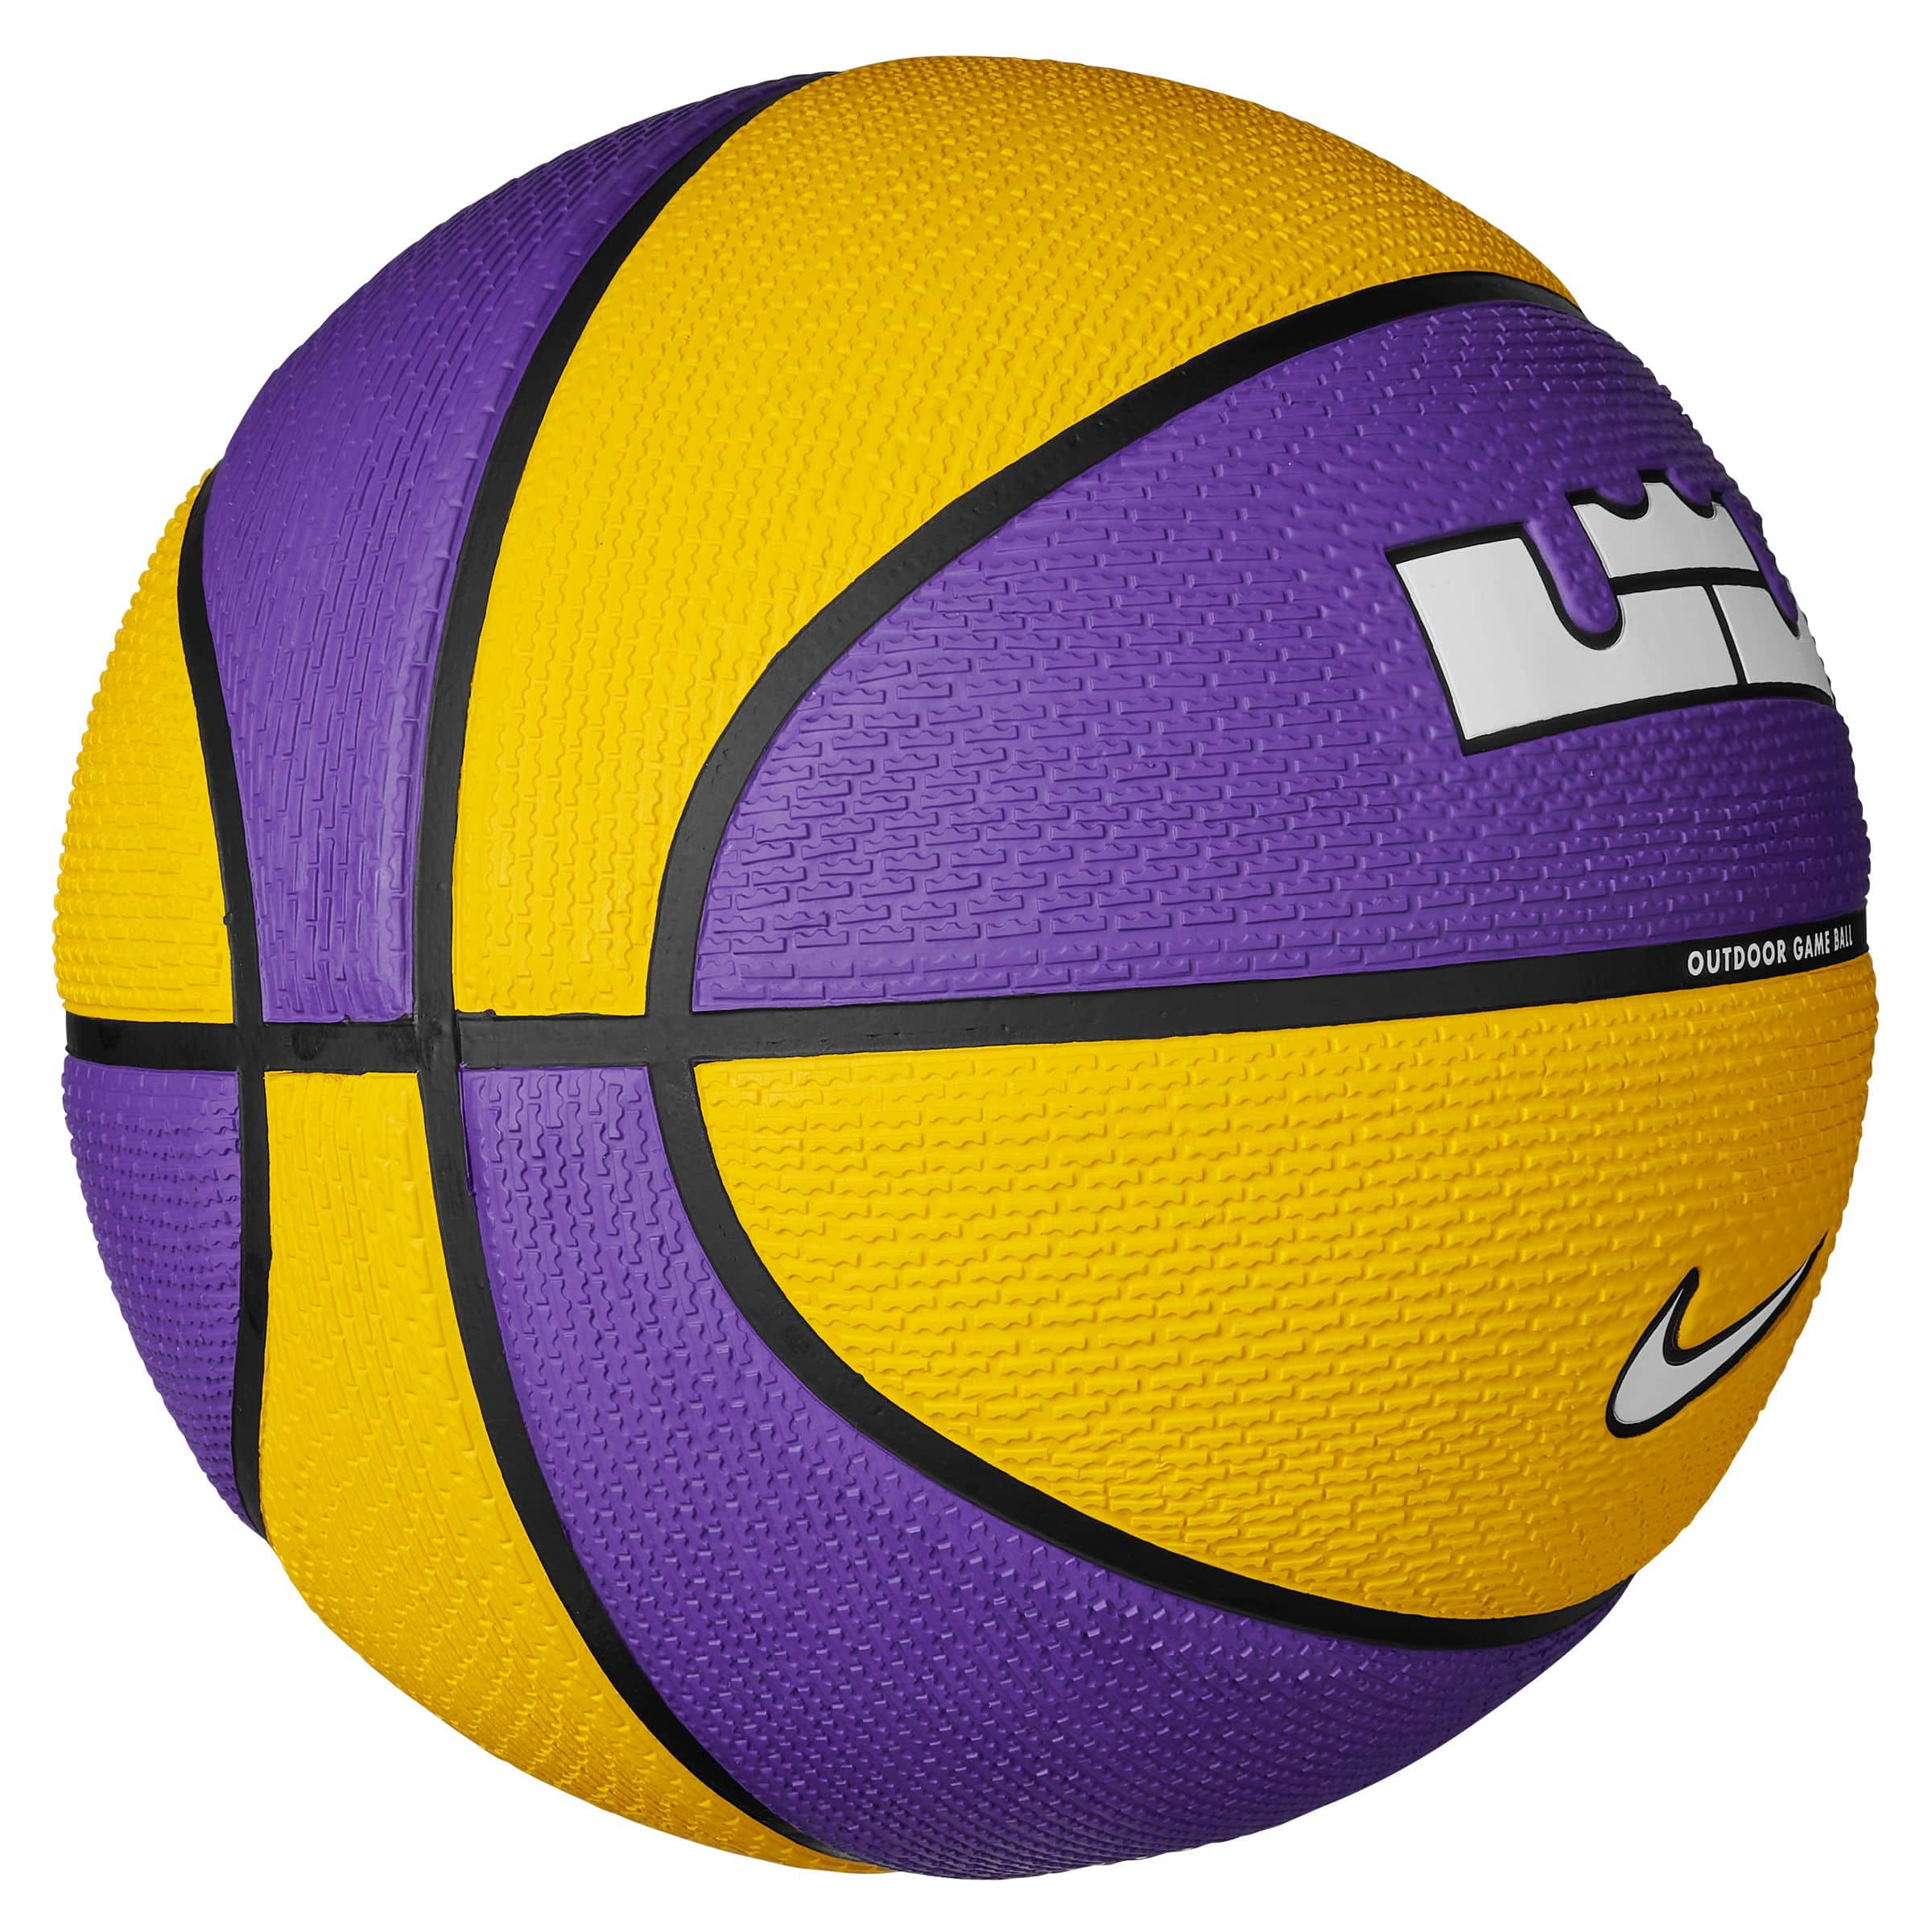 Nike LeBron Outdoor Rubber Basketball, Official Size 7 (29.5-in),  Purple/Yellow | Canadian Tire